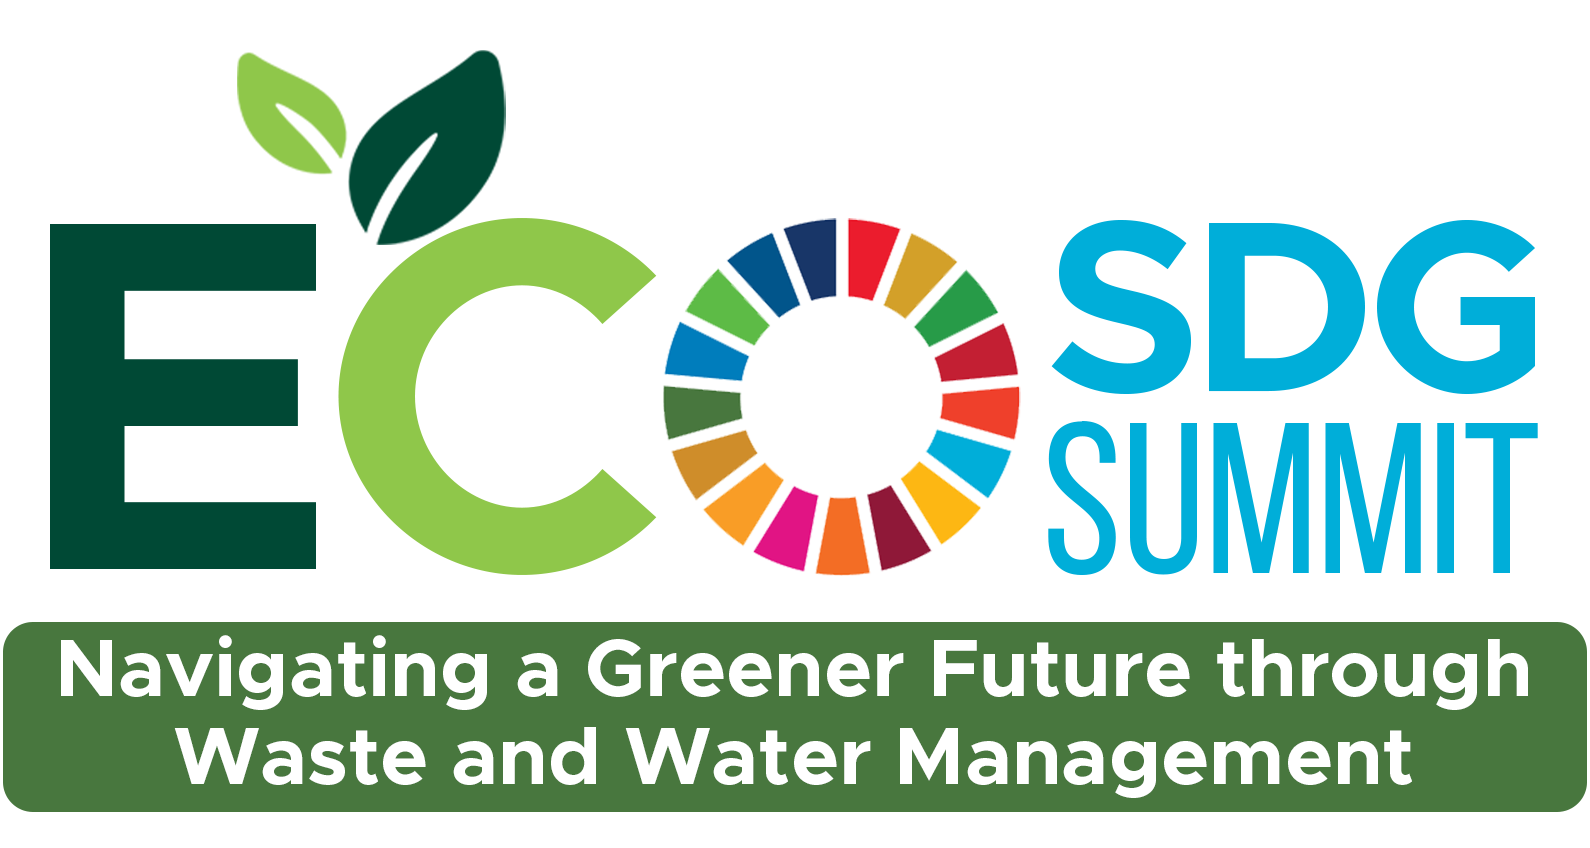 "Empowering Minds for a Greener Future: Insights and Inspiration from the EcoSDG Summit"